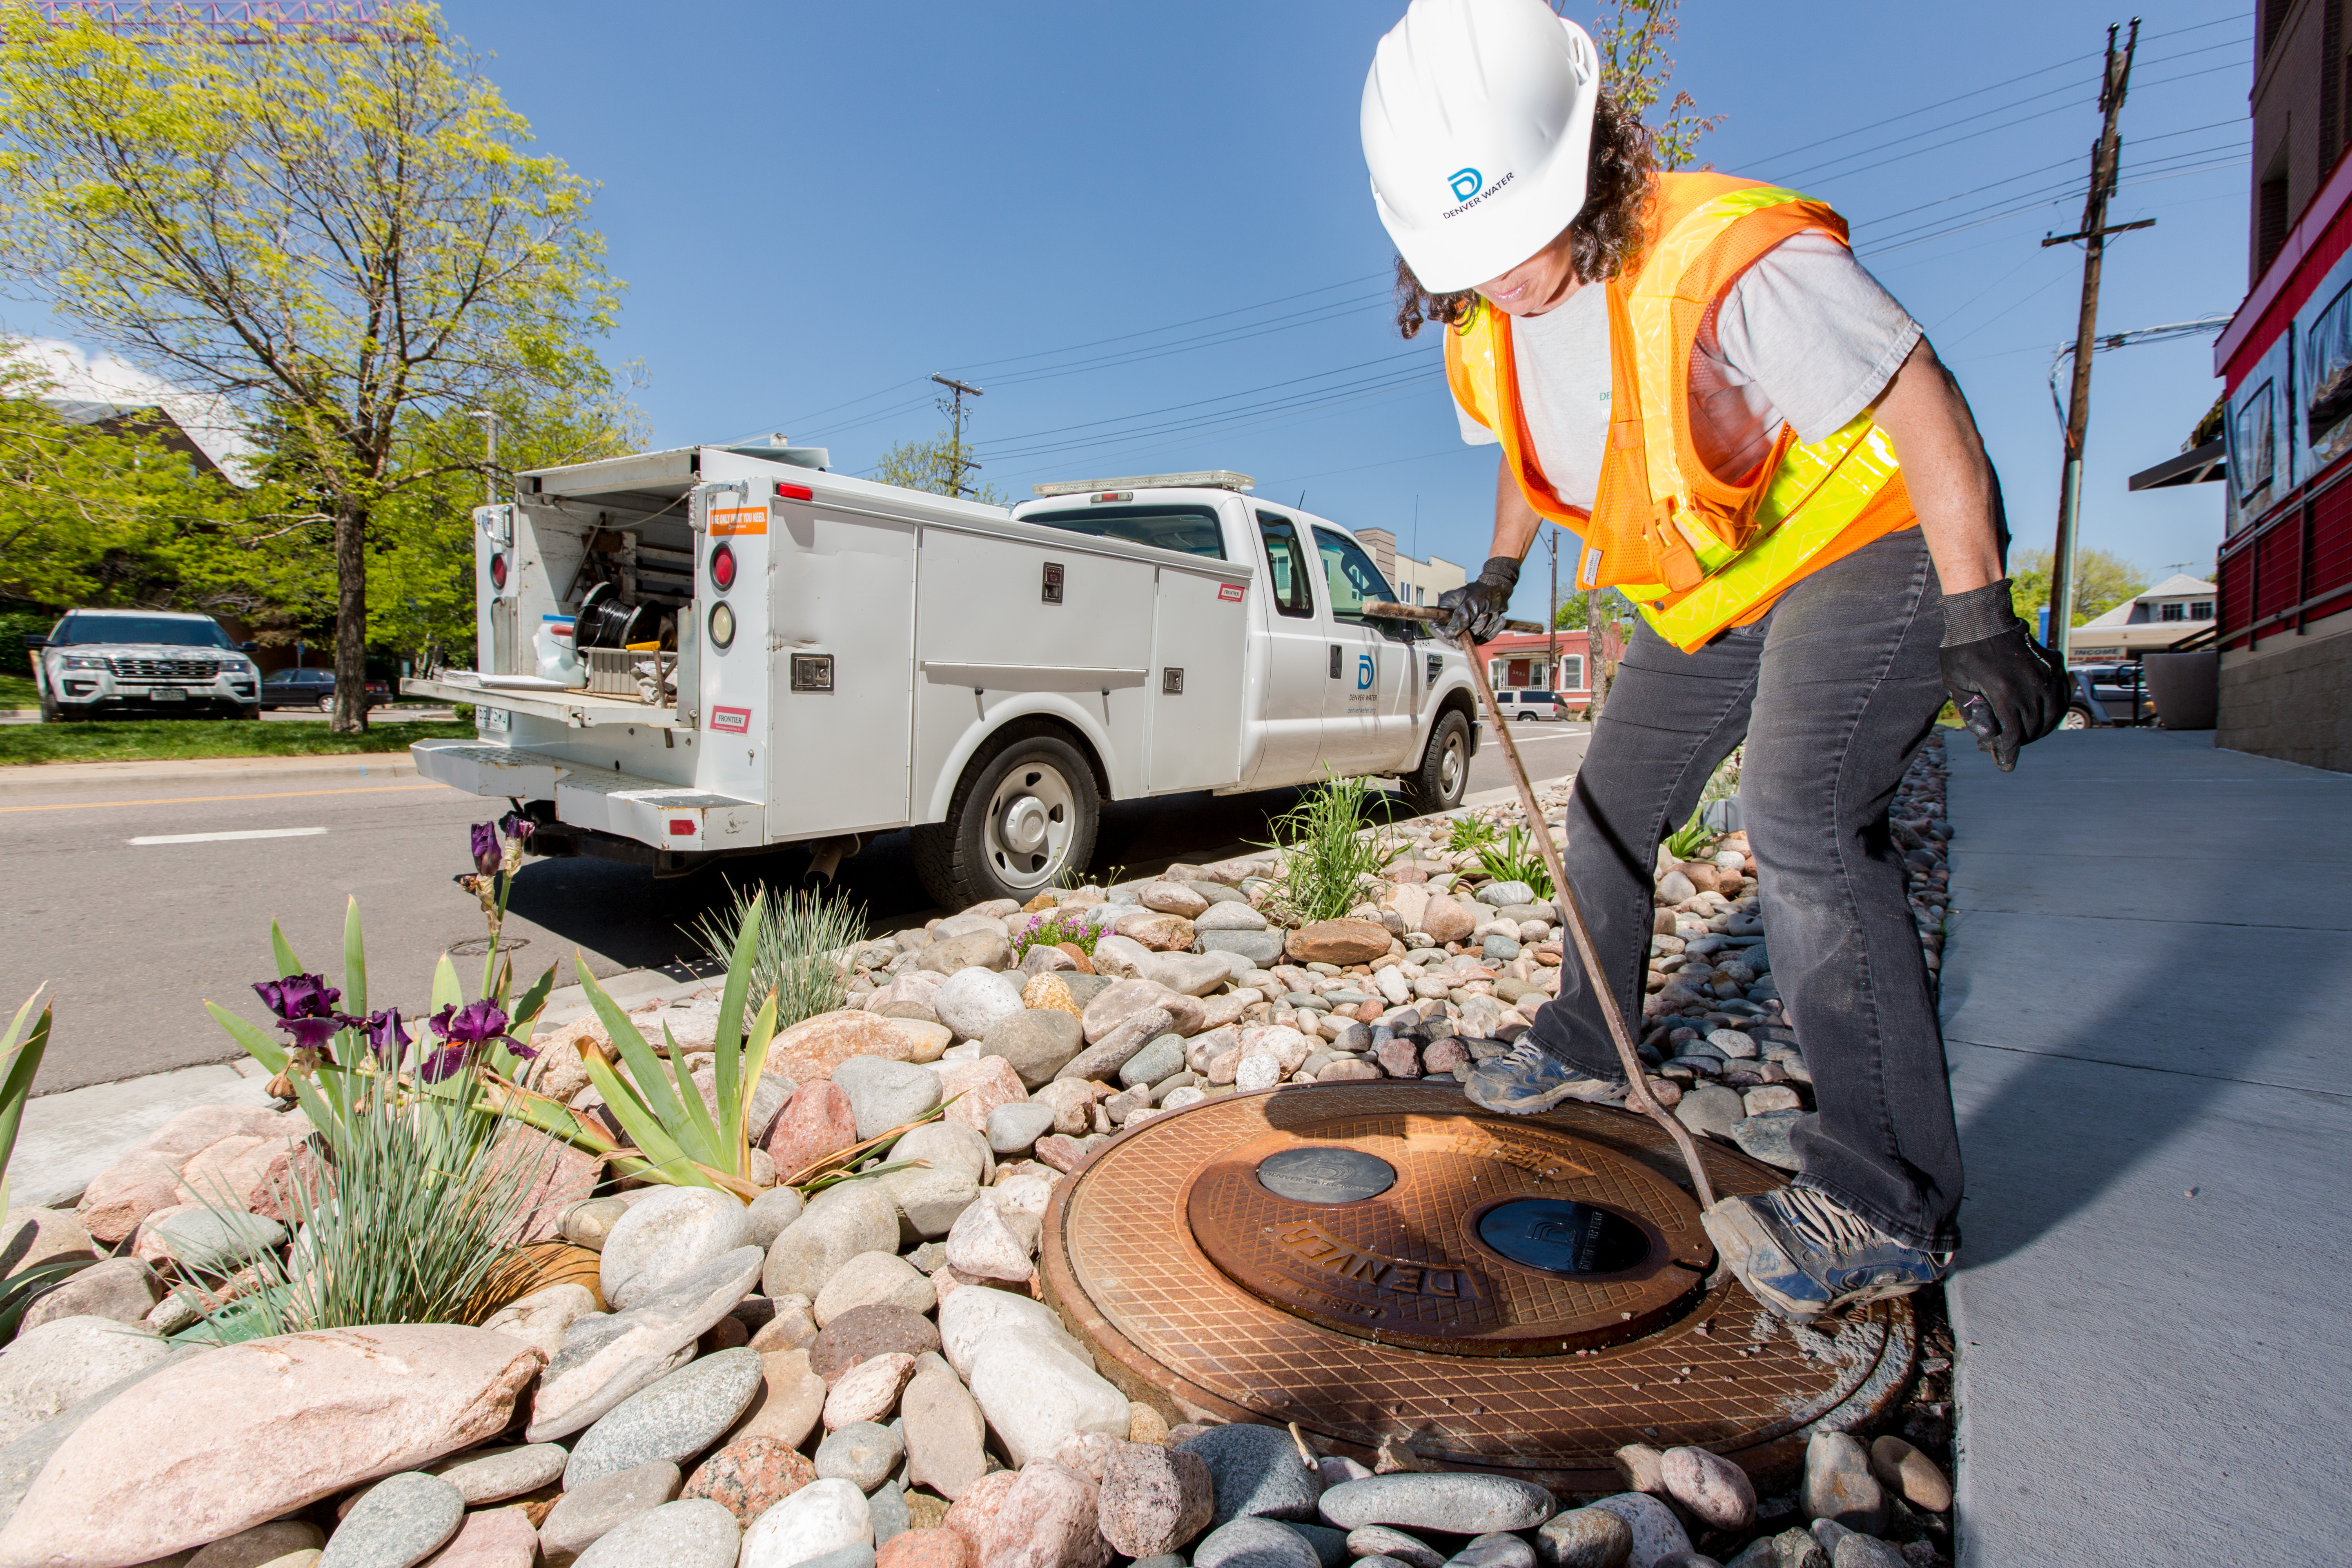 Kesha Coombs, Denver Water meter inspector, opens a manhole cover to access a meter pit.